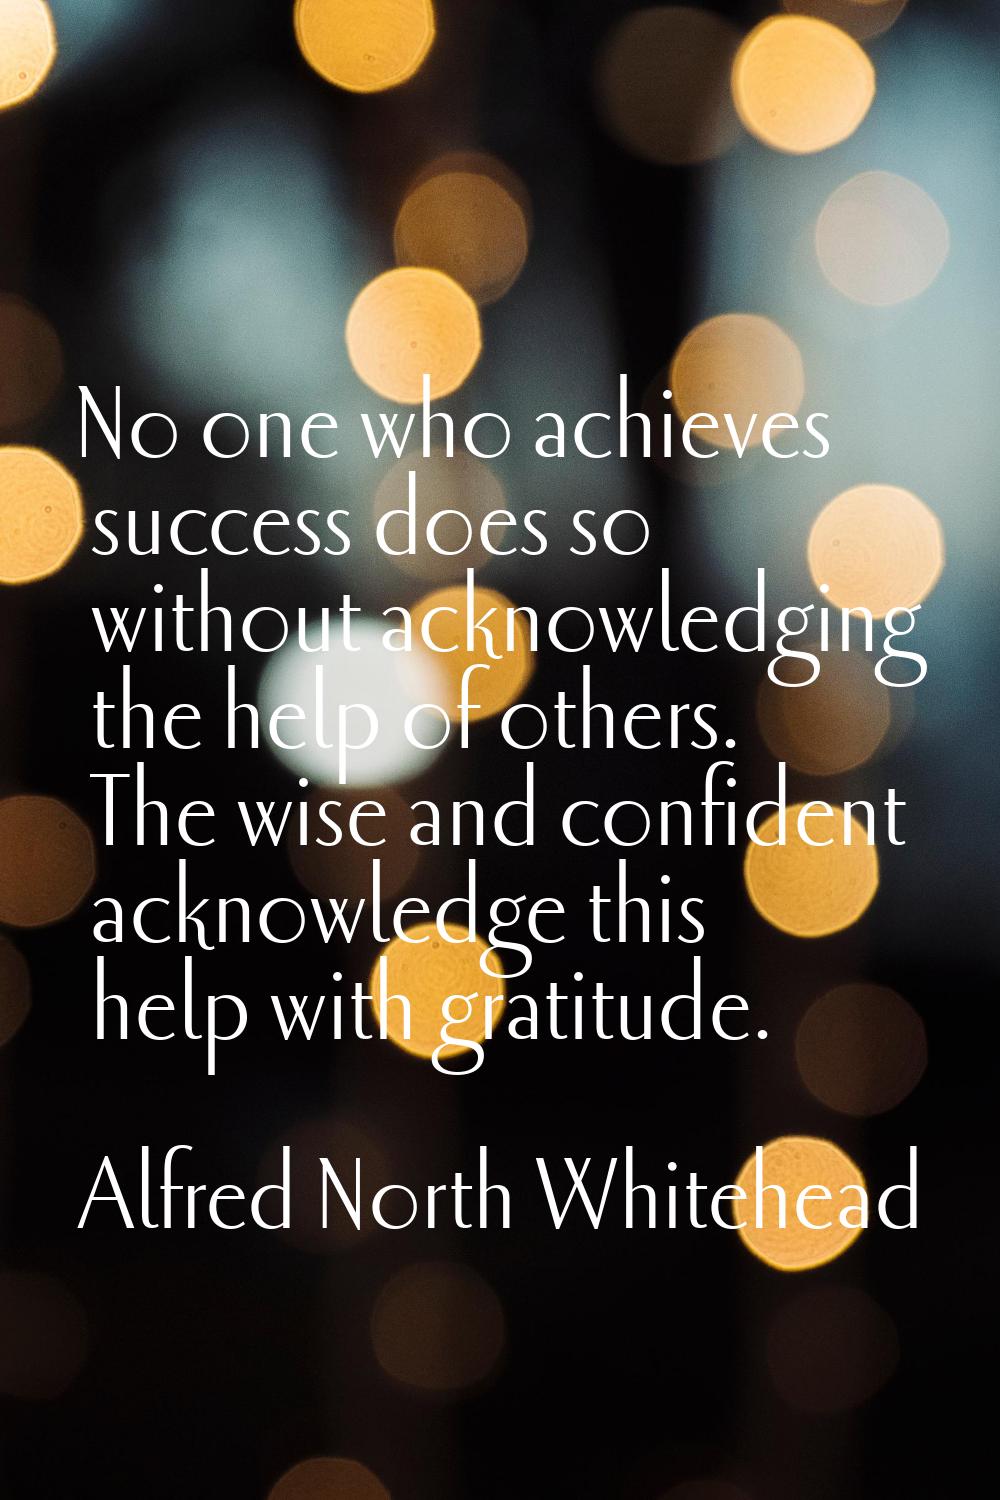 No one who achieves success does so without acknowledging the help of others. The wise and confiden